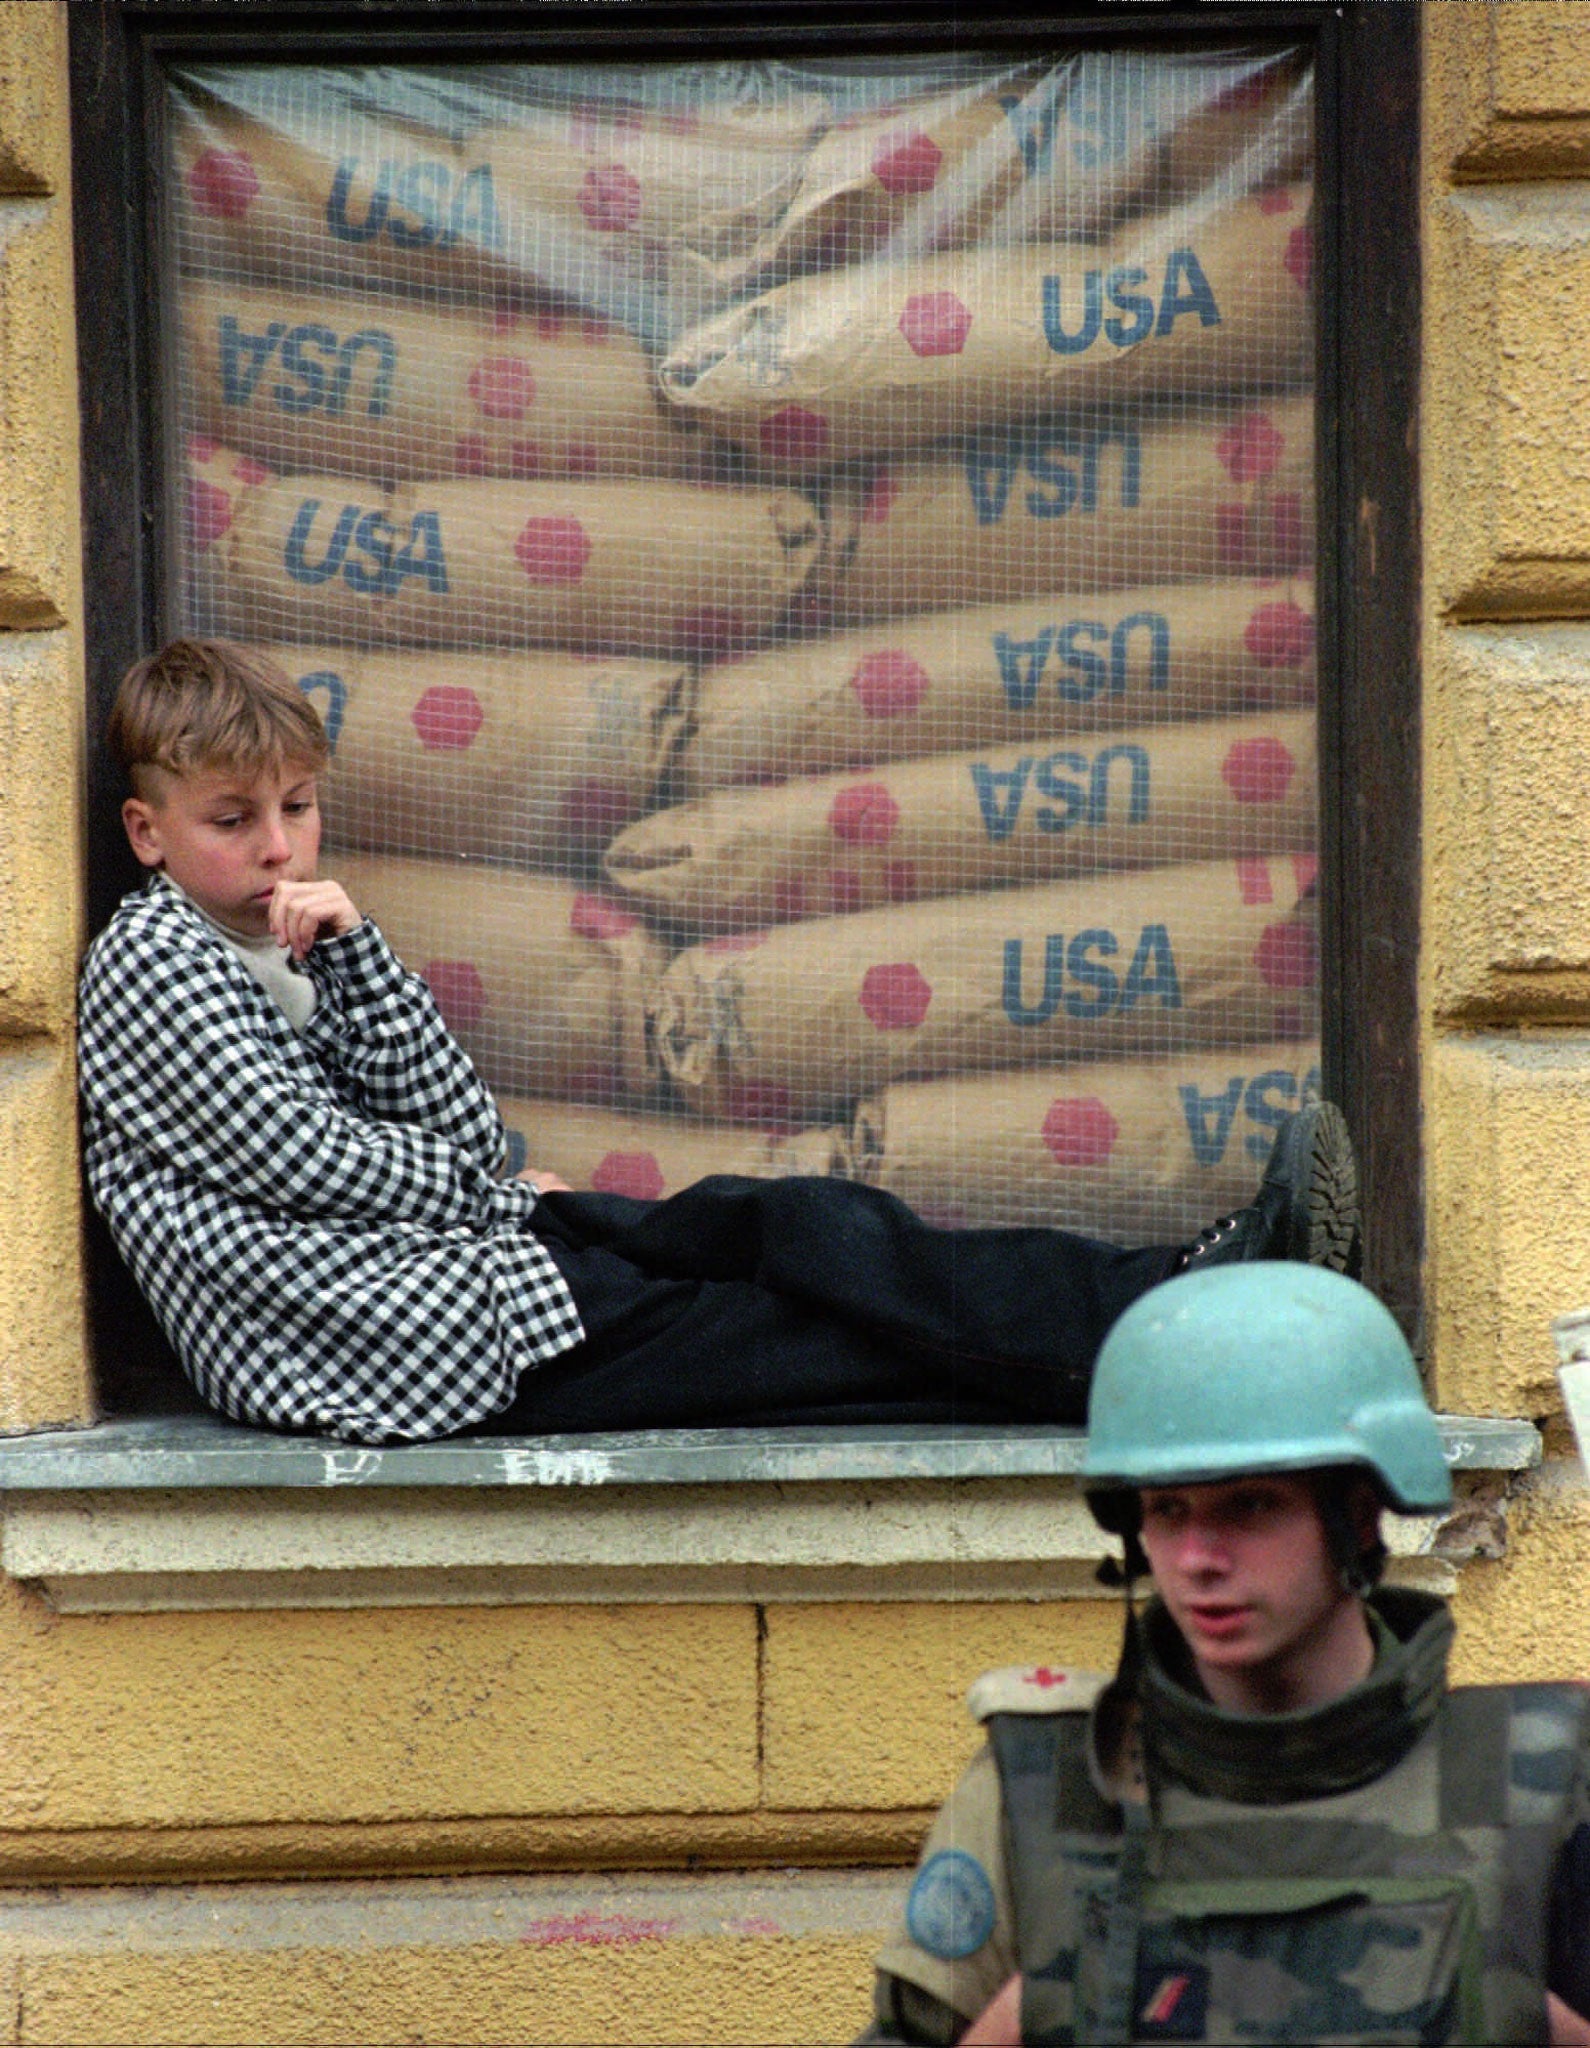 The 'meanings of home': United Nations soldier in Sarajevo, September 1995